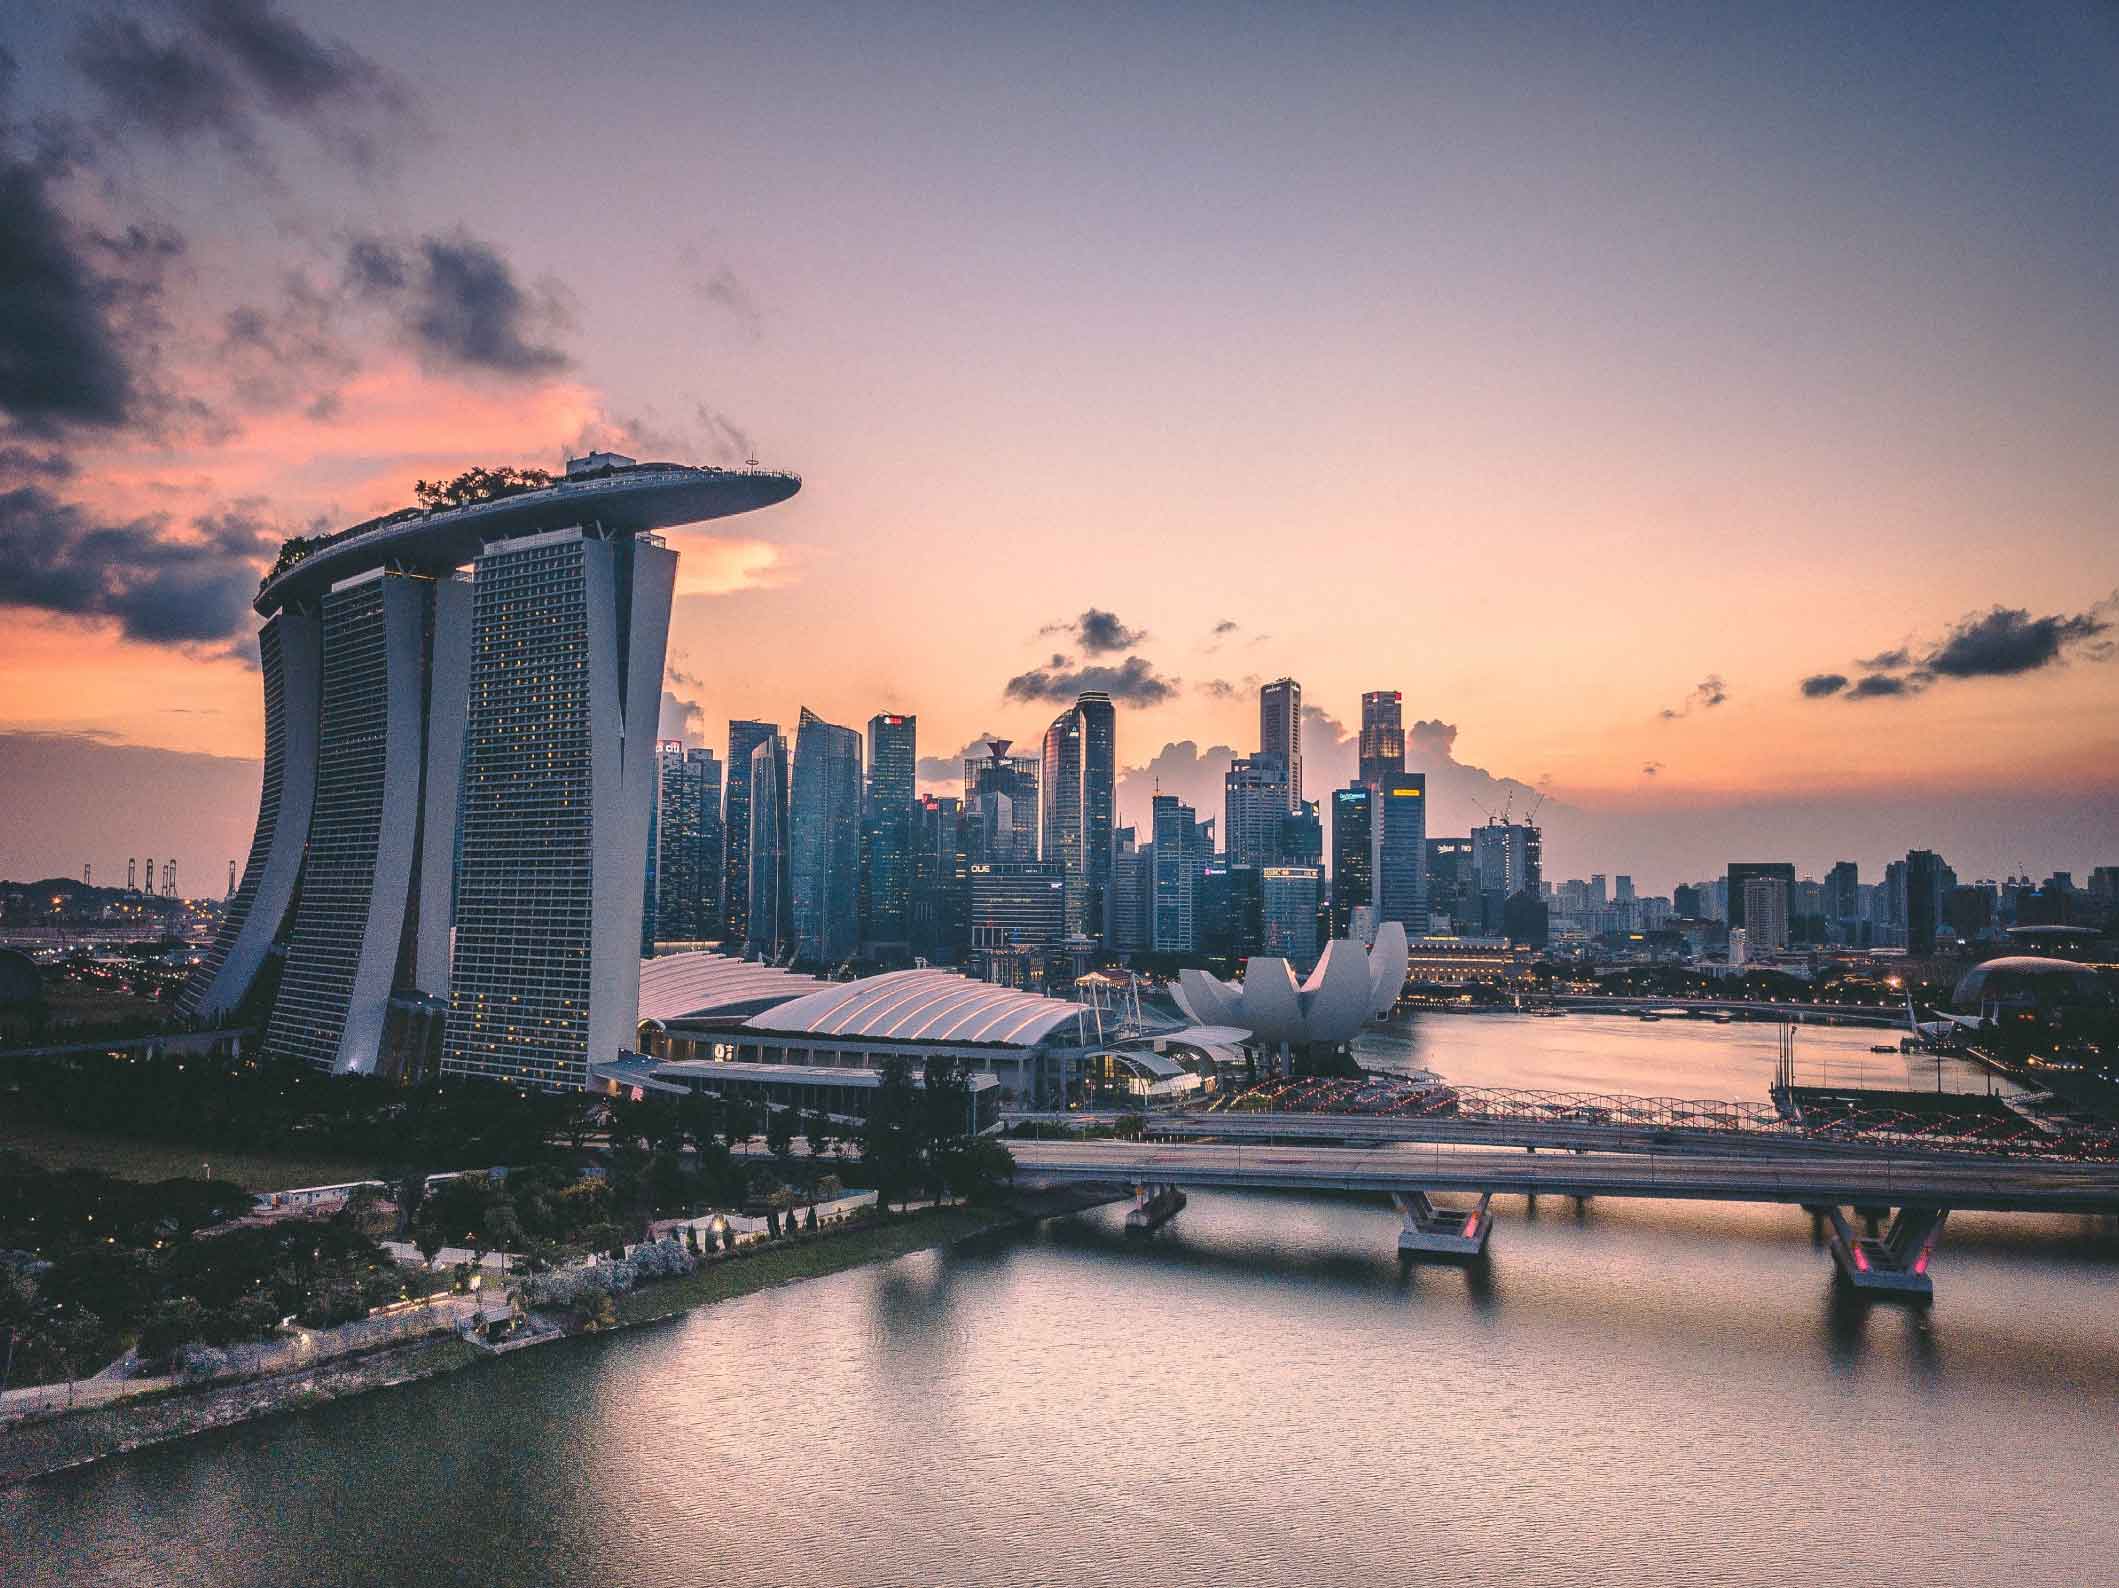 View of the city of Singapore